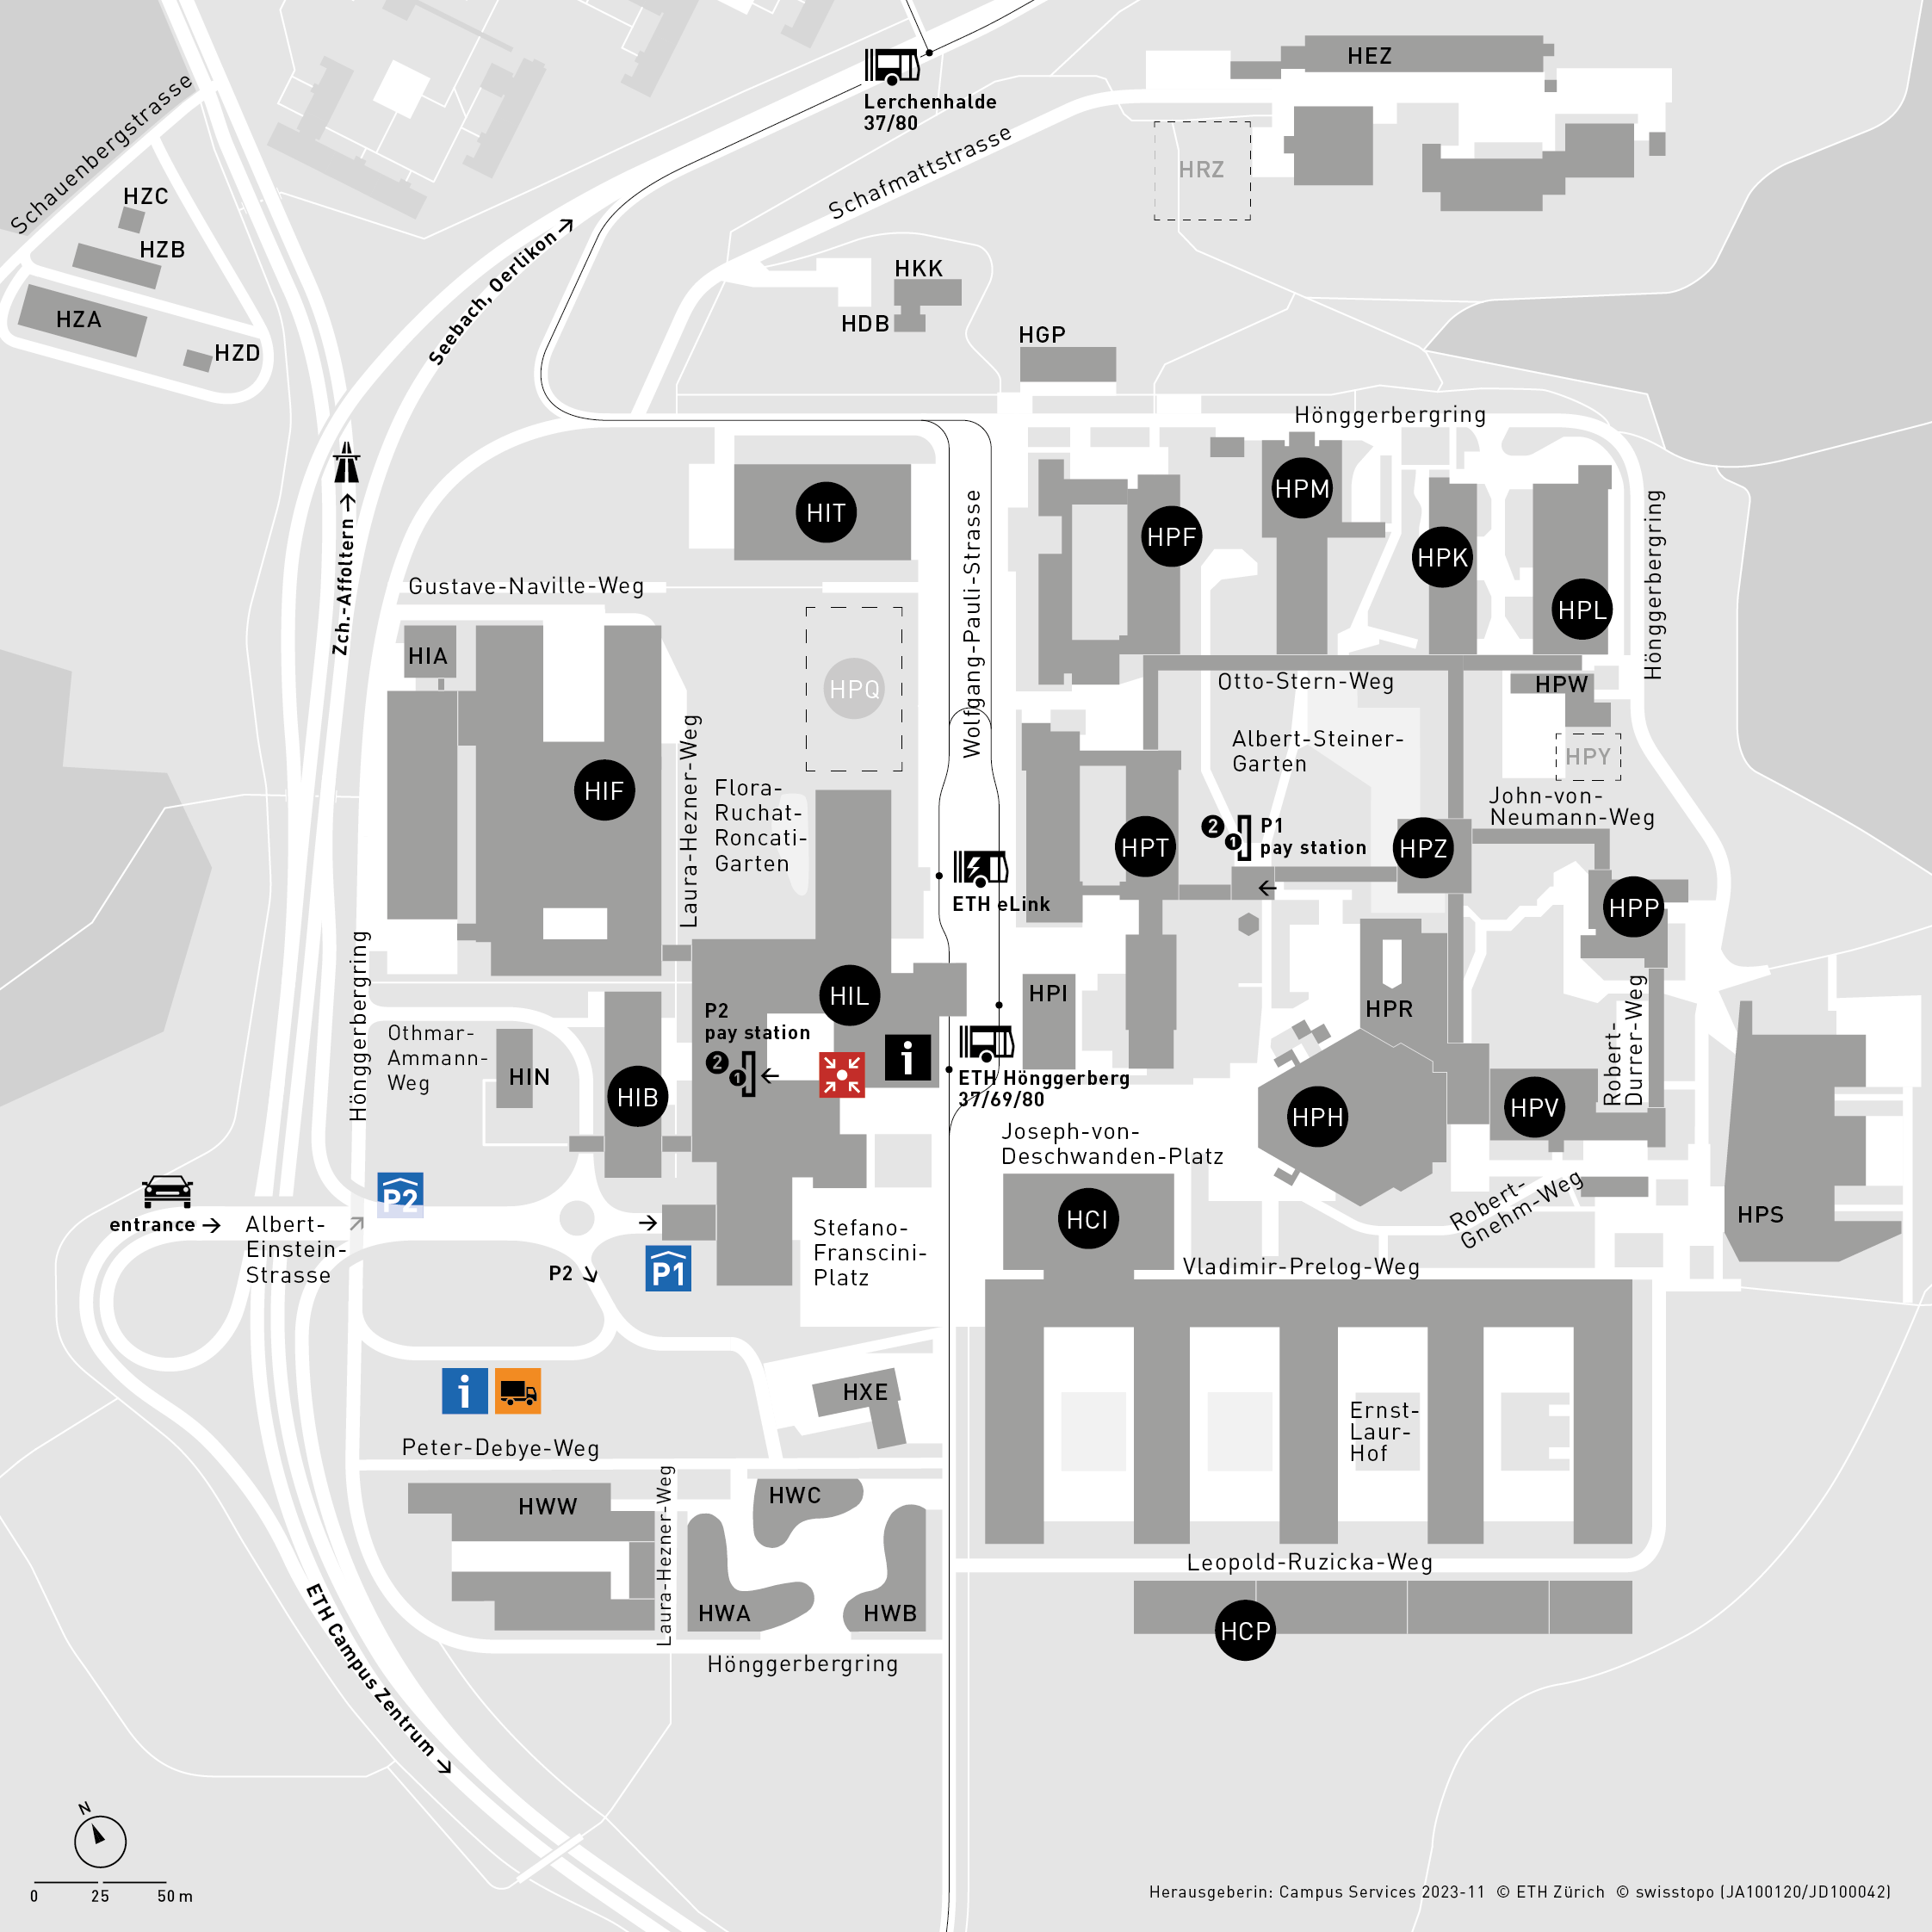 location of the bus stop "ETH Hönggerberg" on a campus map and directions to HCI Building